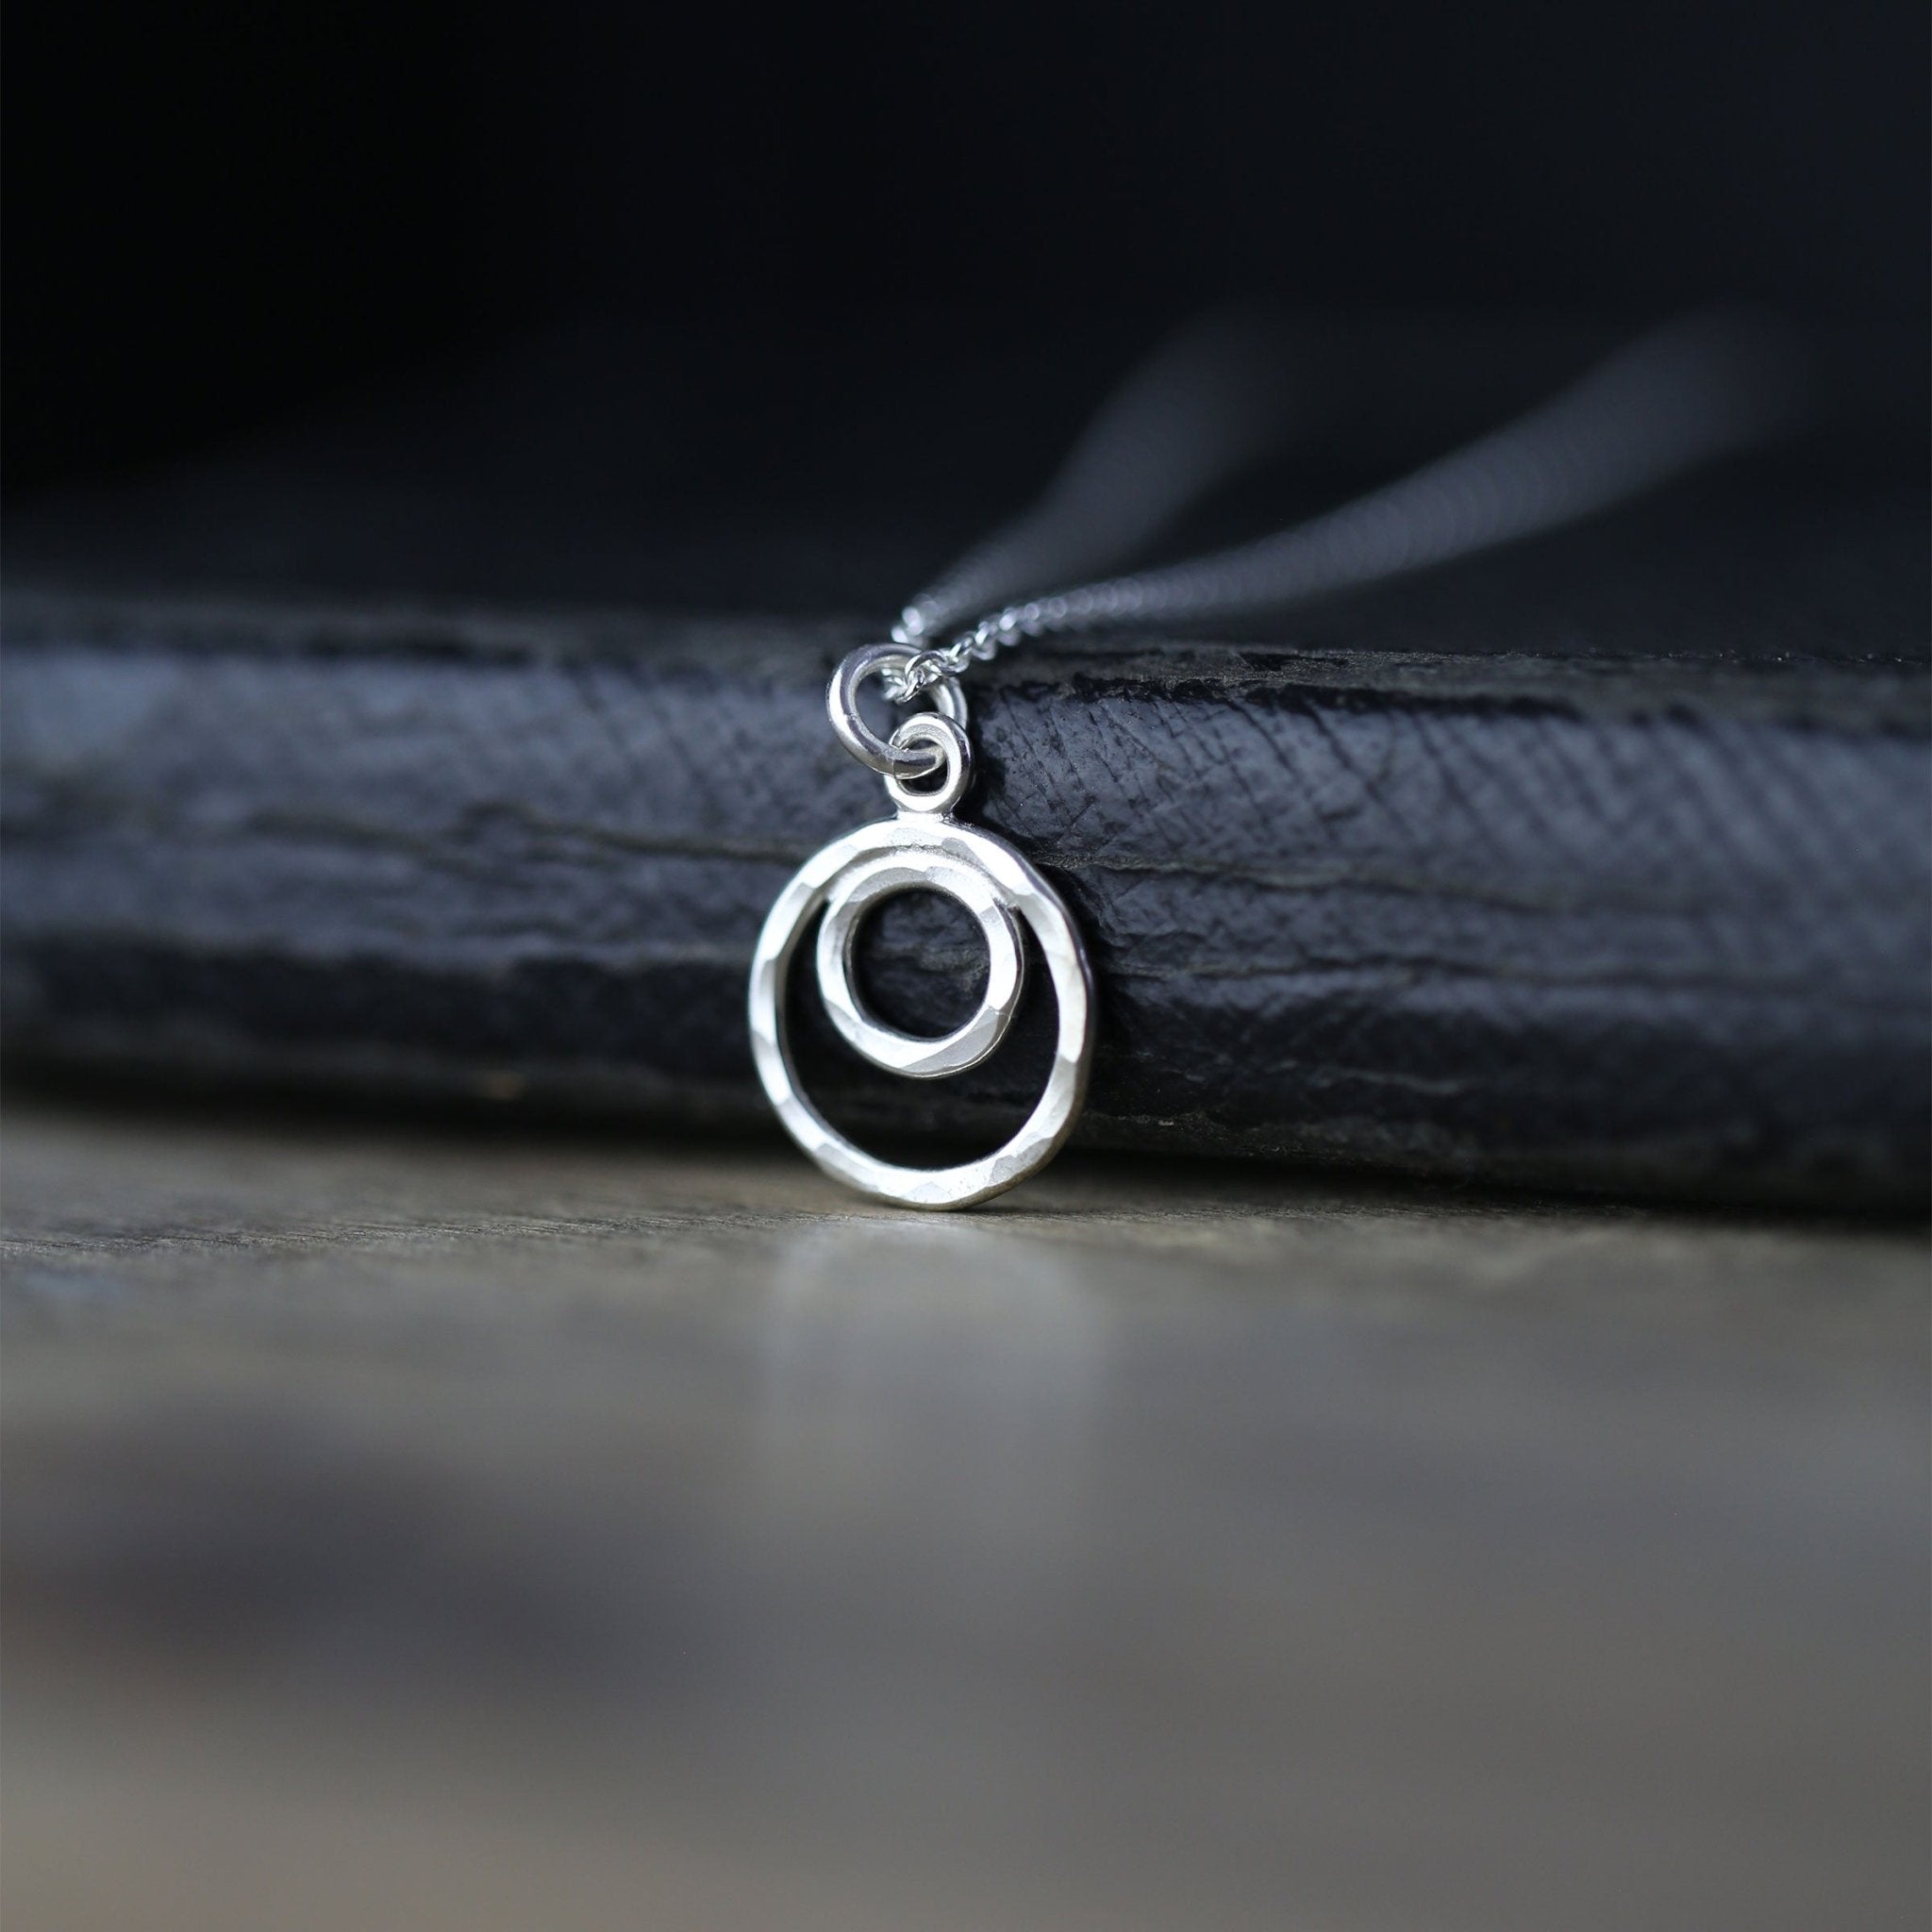 Hammered Double Circle Necklace